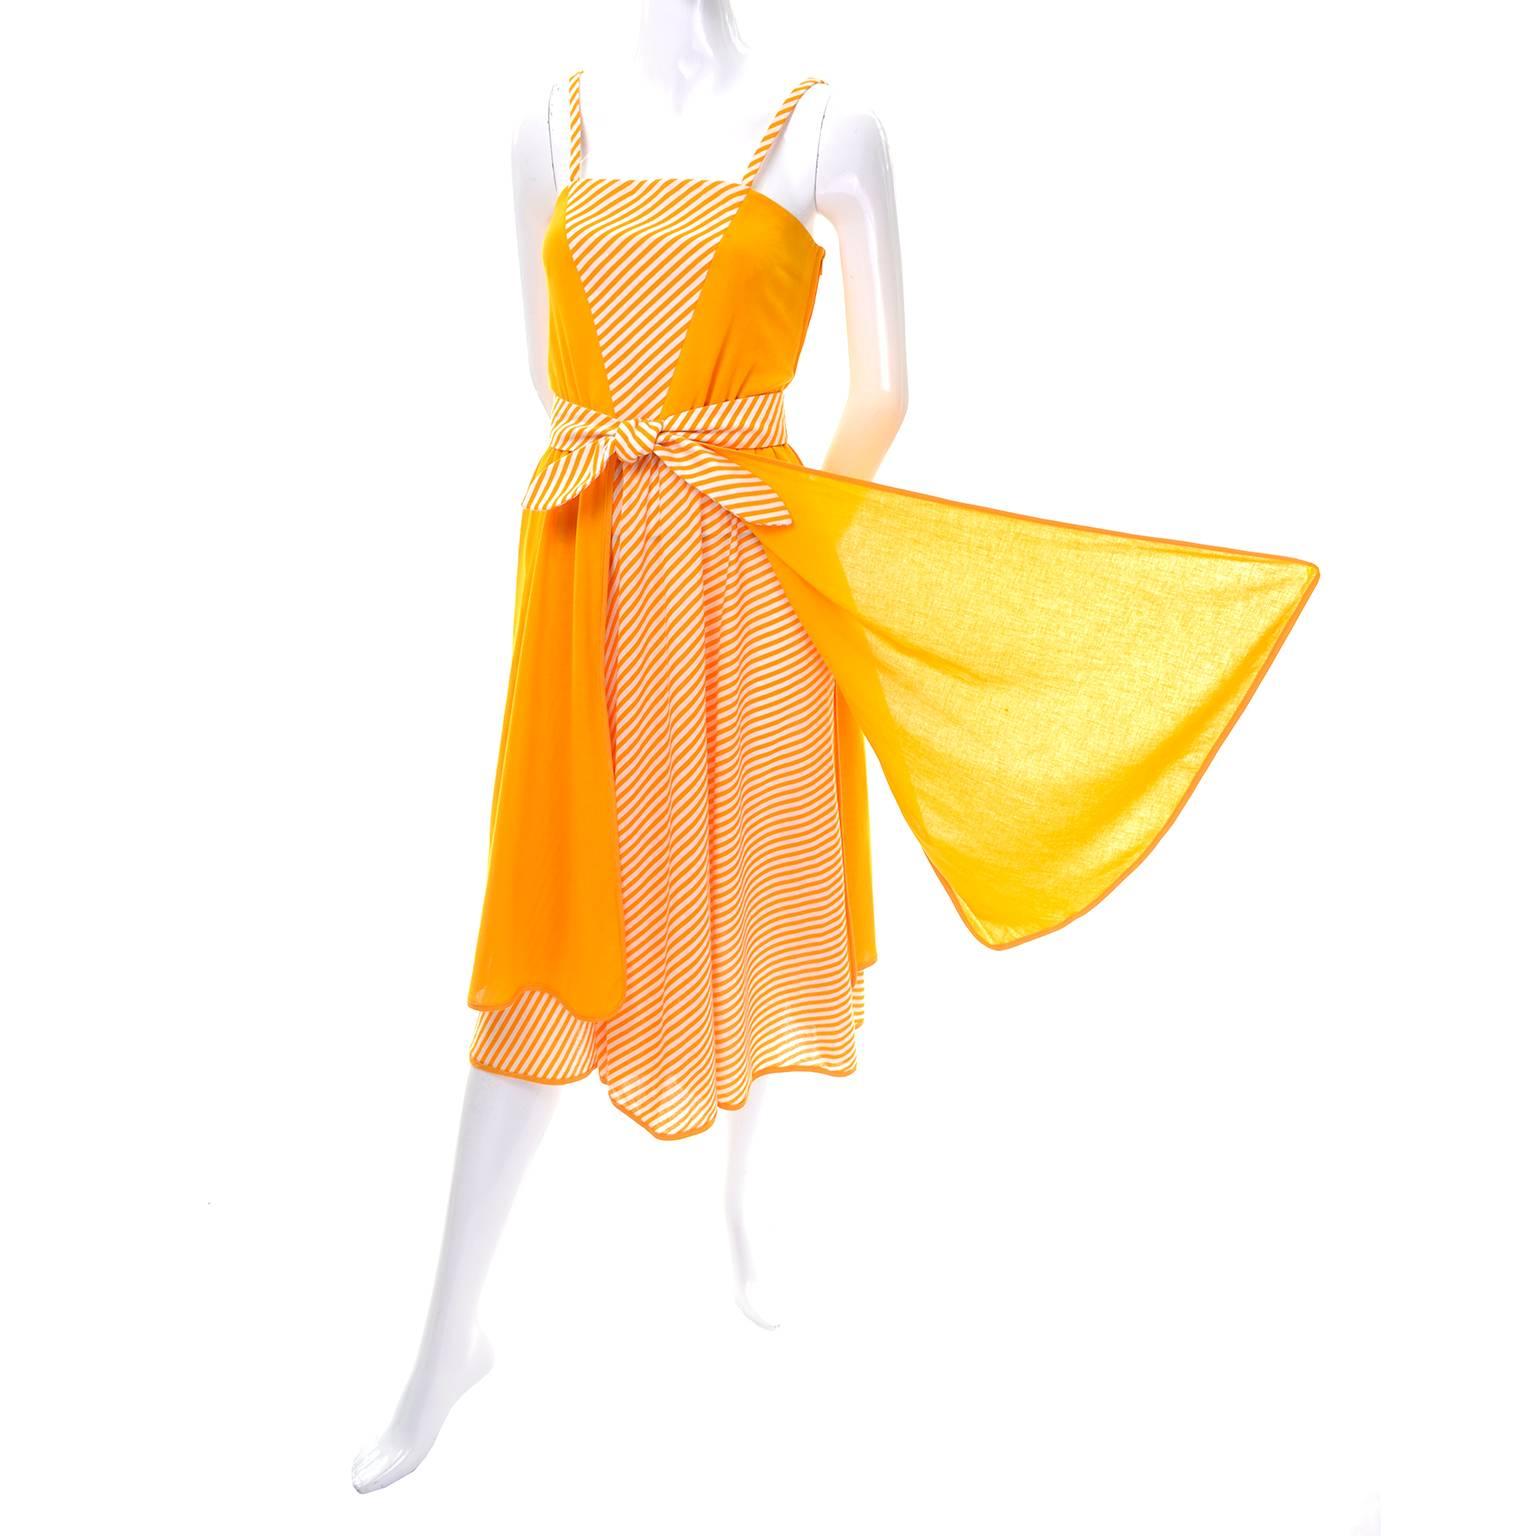 This bright and cheerful deadstock 1970's vintage sun dress by Lanvin has spaghetti straps and marigold orange/yellow and white strips on the skirt and in a V shape on the bust. The striped skirt is layered with four unique free-flowing panels that